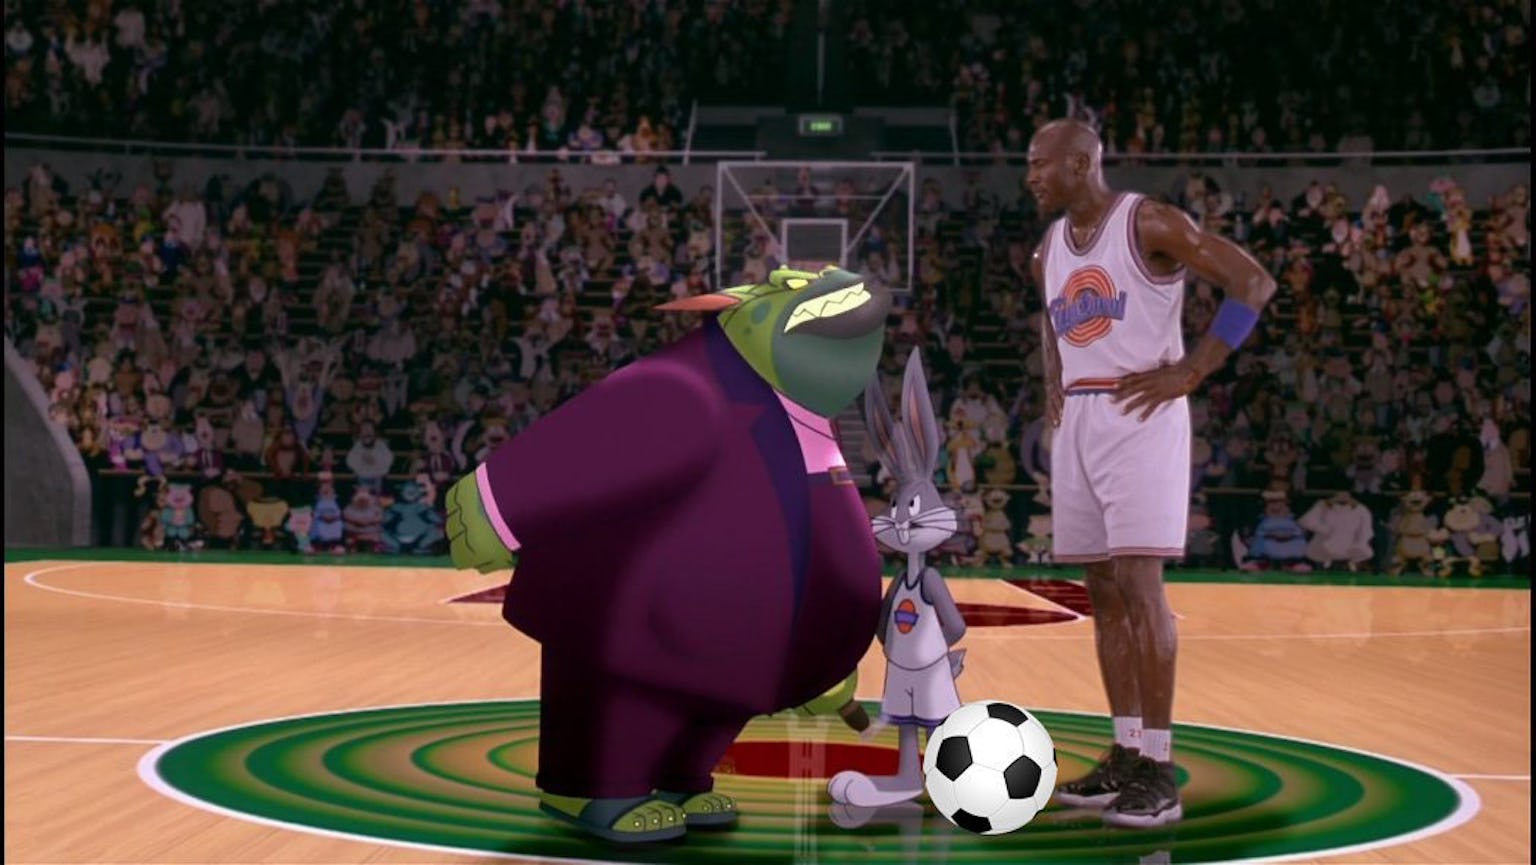 #39 Space Jam 2 #39 Is On the Way and Might Not Be About Basketball